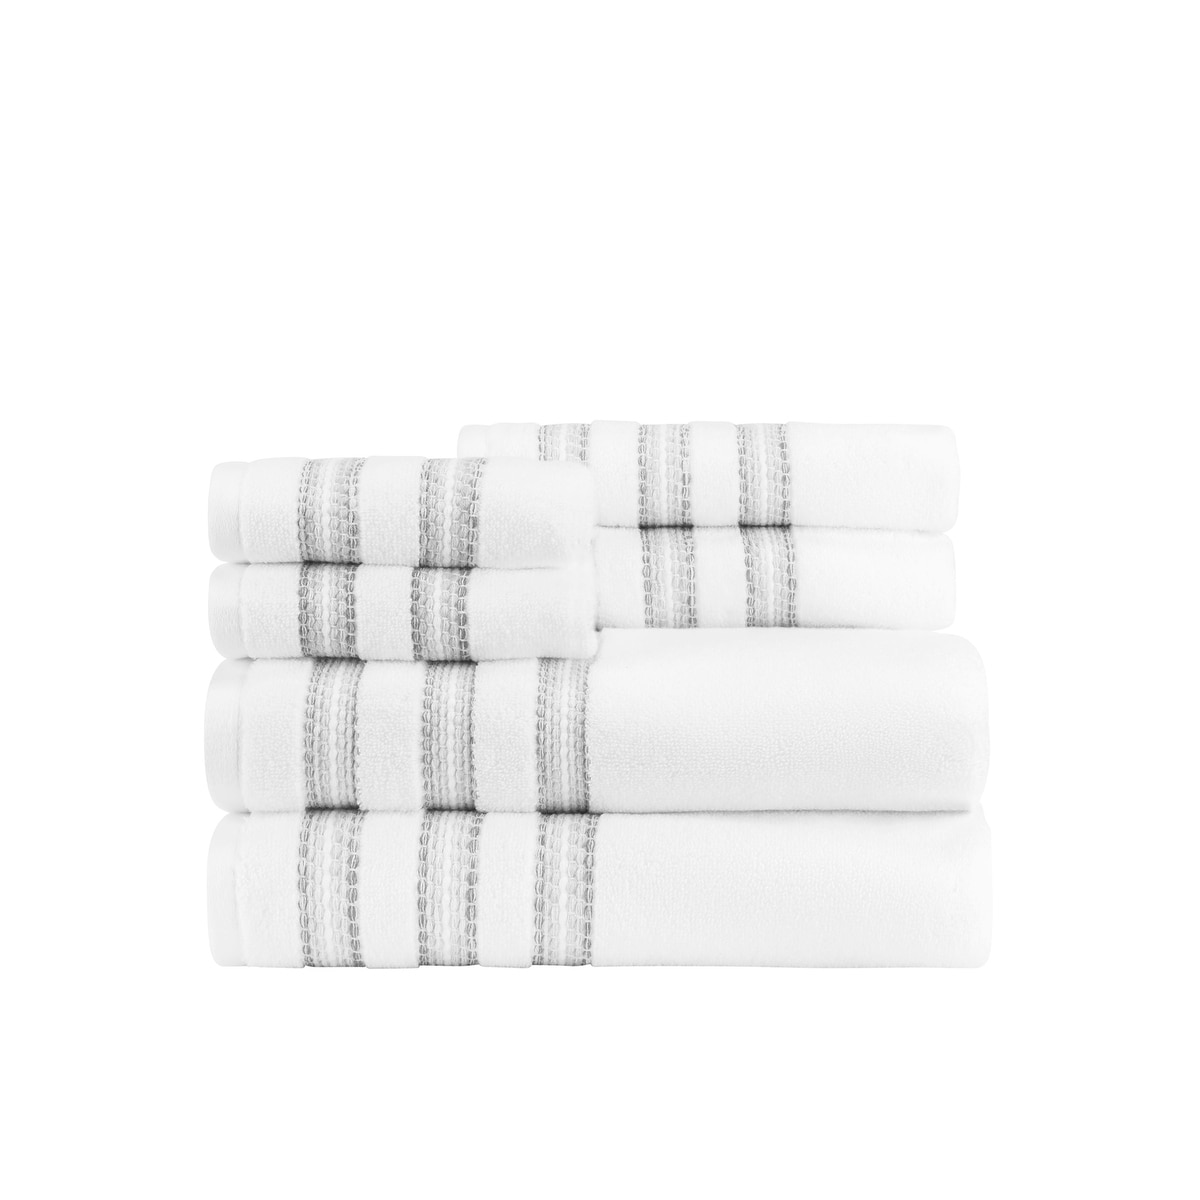 https://ak1.ostkcdn.com/images/products/is/images/direct/4f6b85d513d1470fef37f17150f704a947321bc3/Marla-Border-ZT-6pc-Towel-Set.jpg